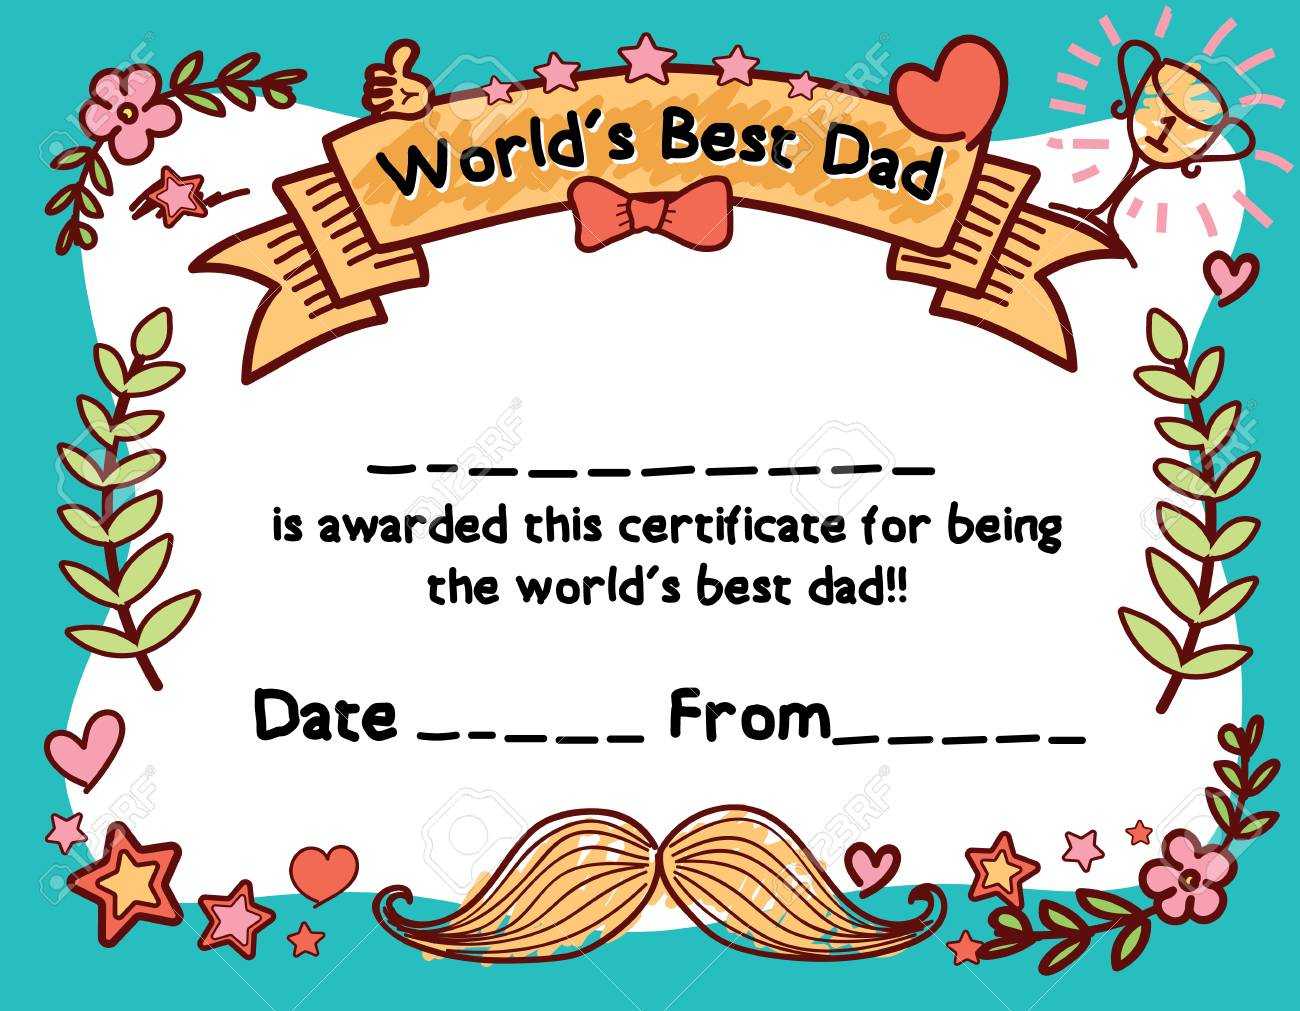 World's Best Dad Award Certificate Template For Father's Day Throughout Player Of The Day Certificate Template